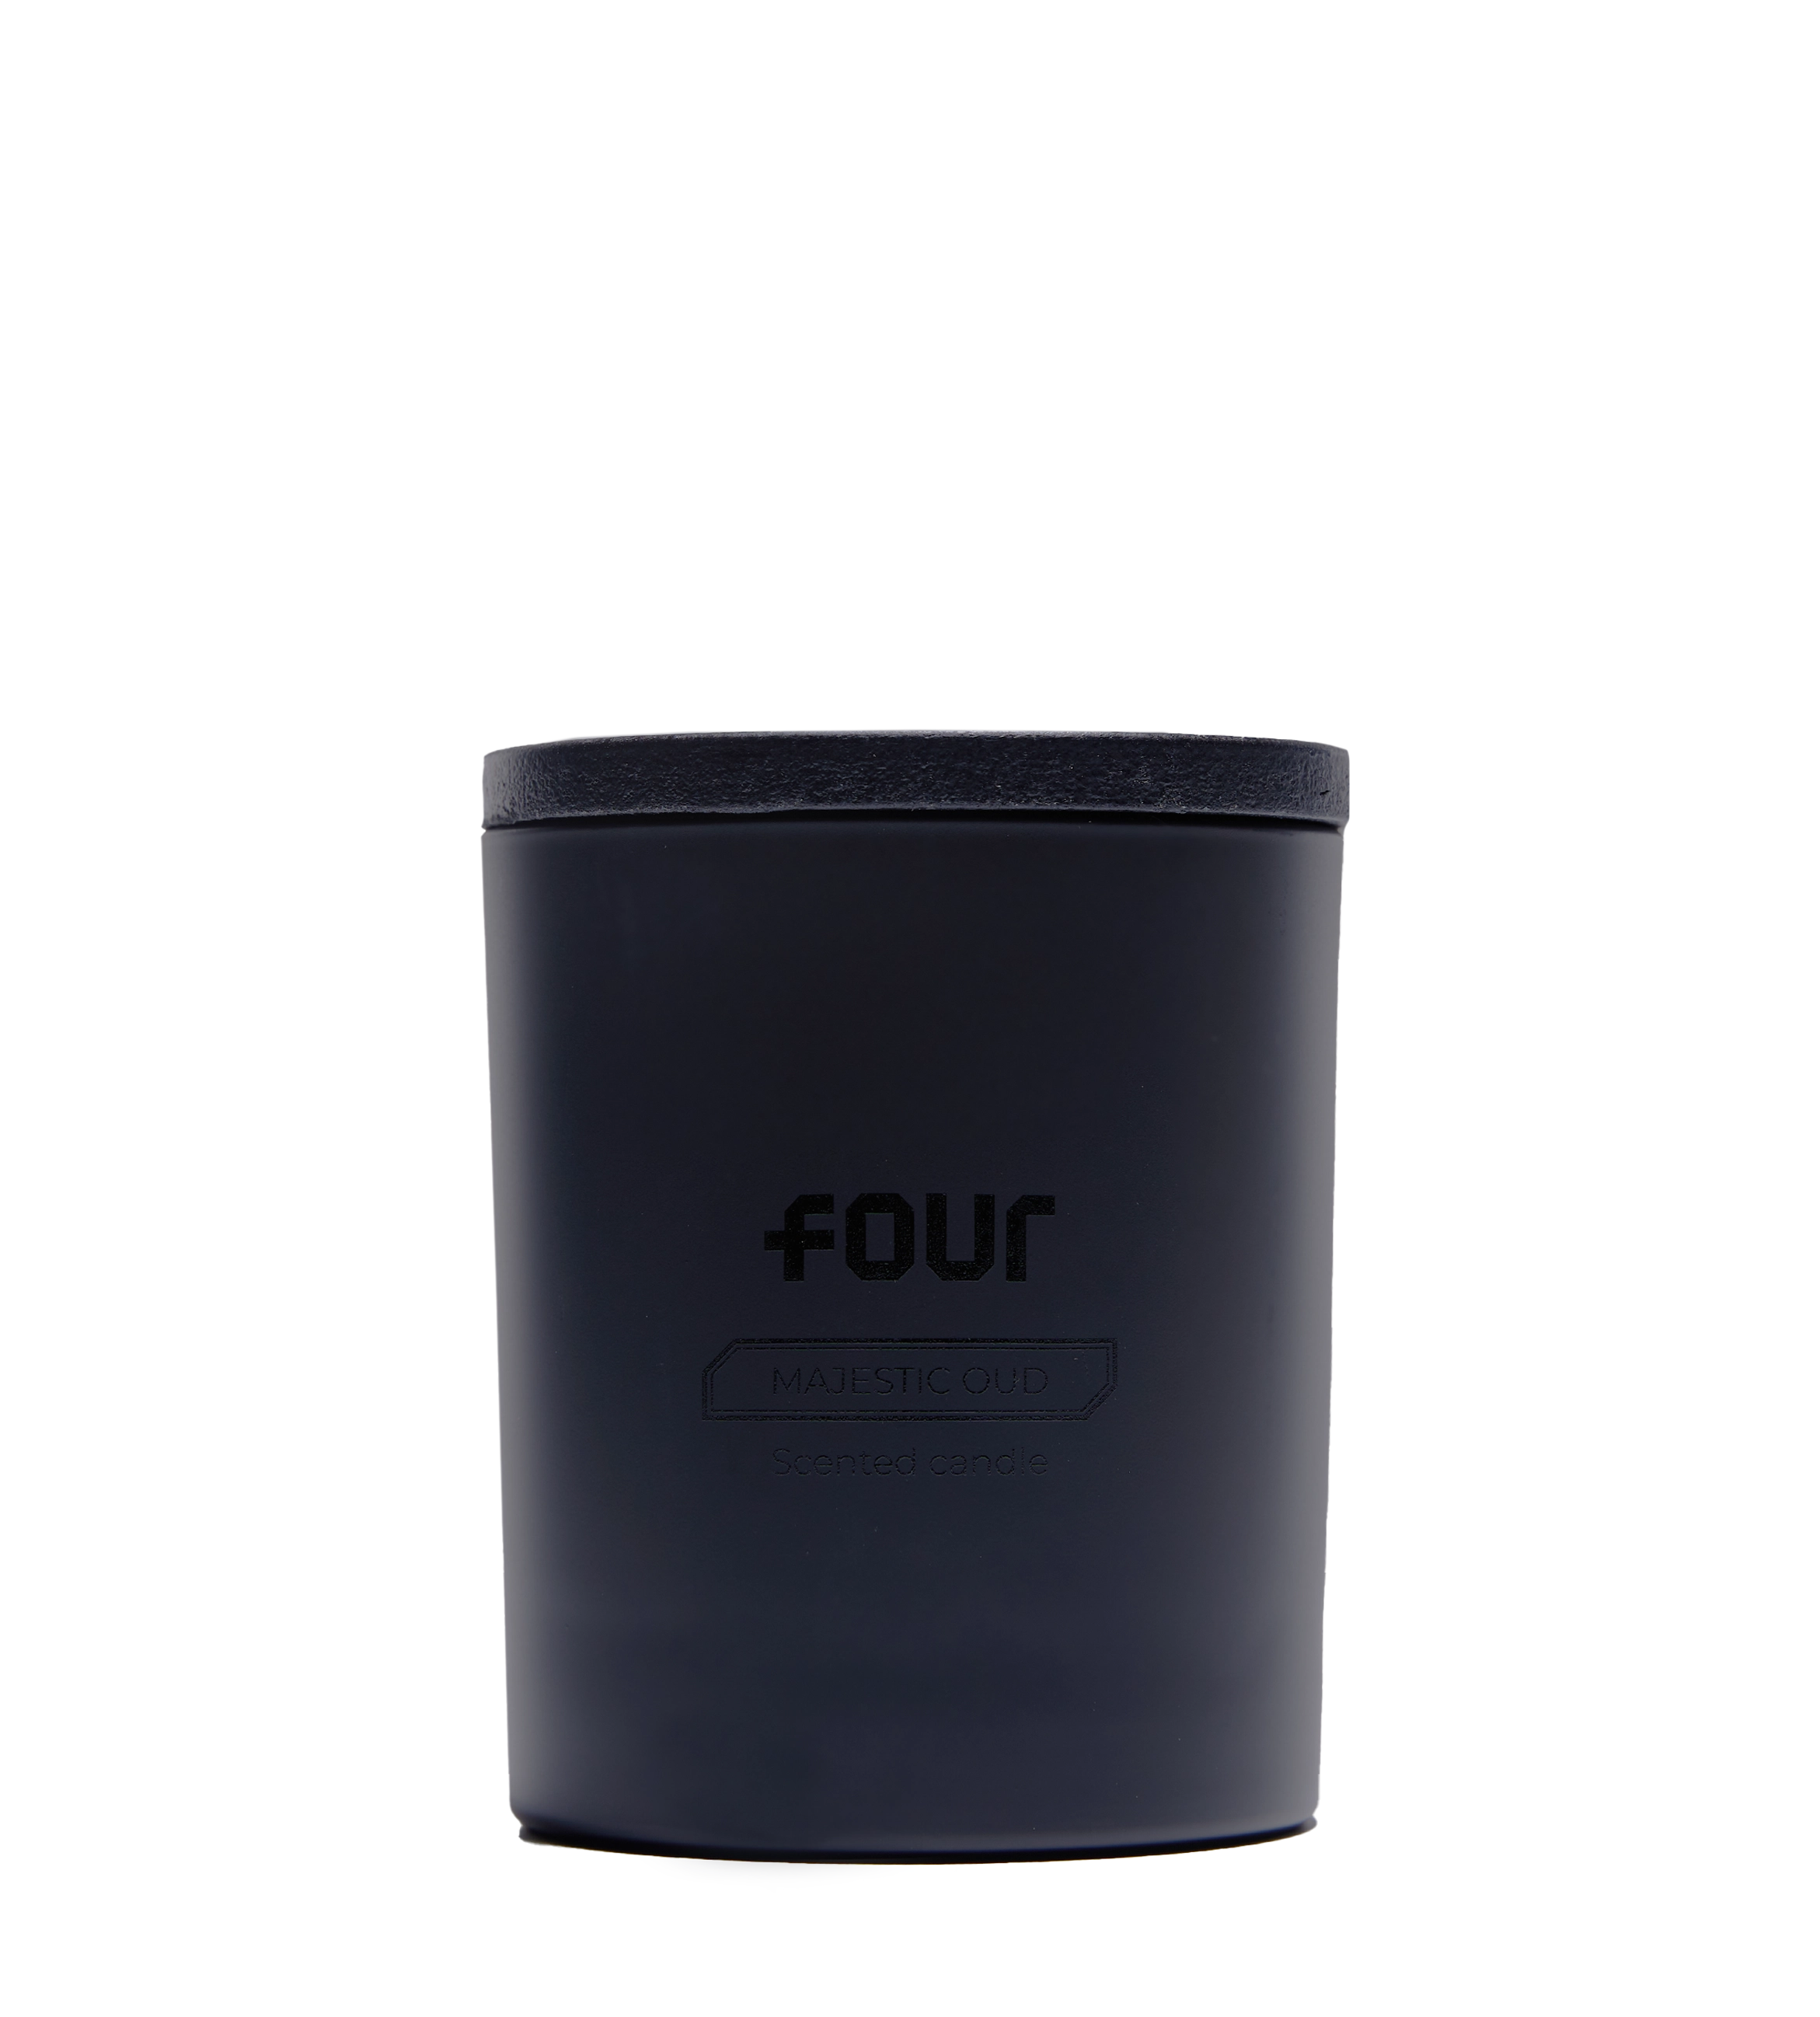 Four Scented Candle Majestic Oud